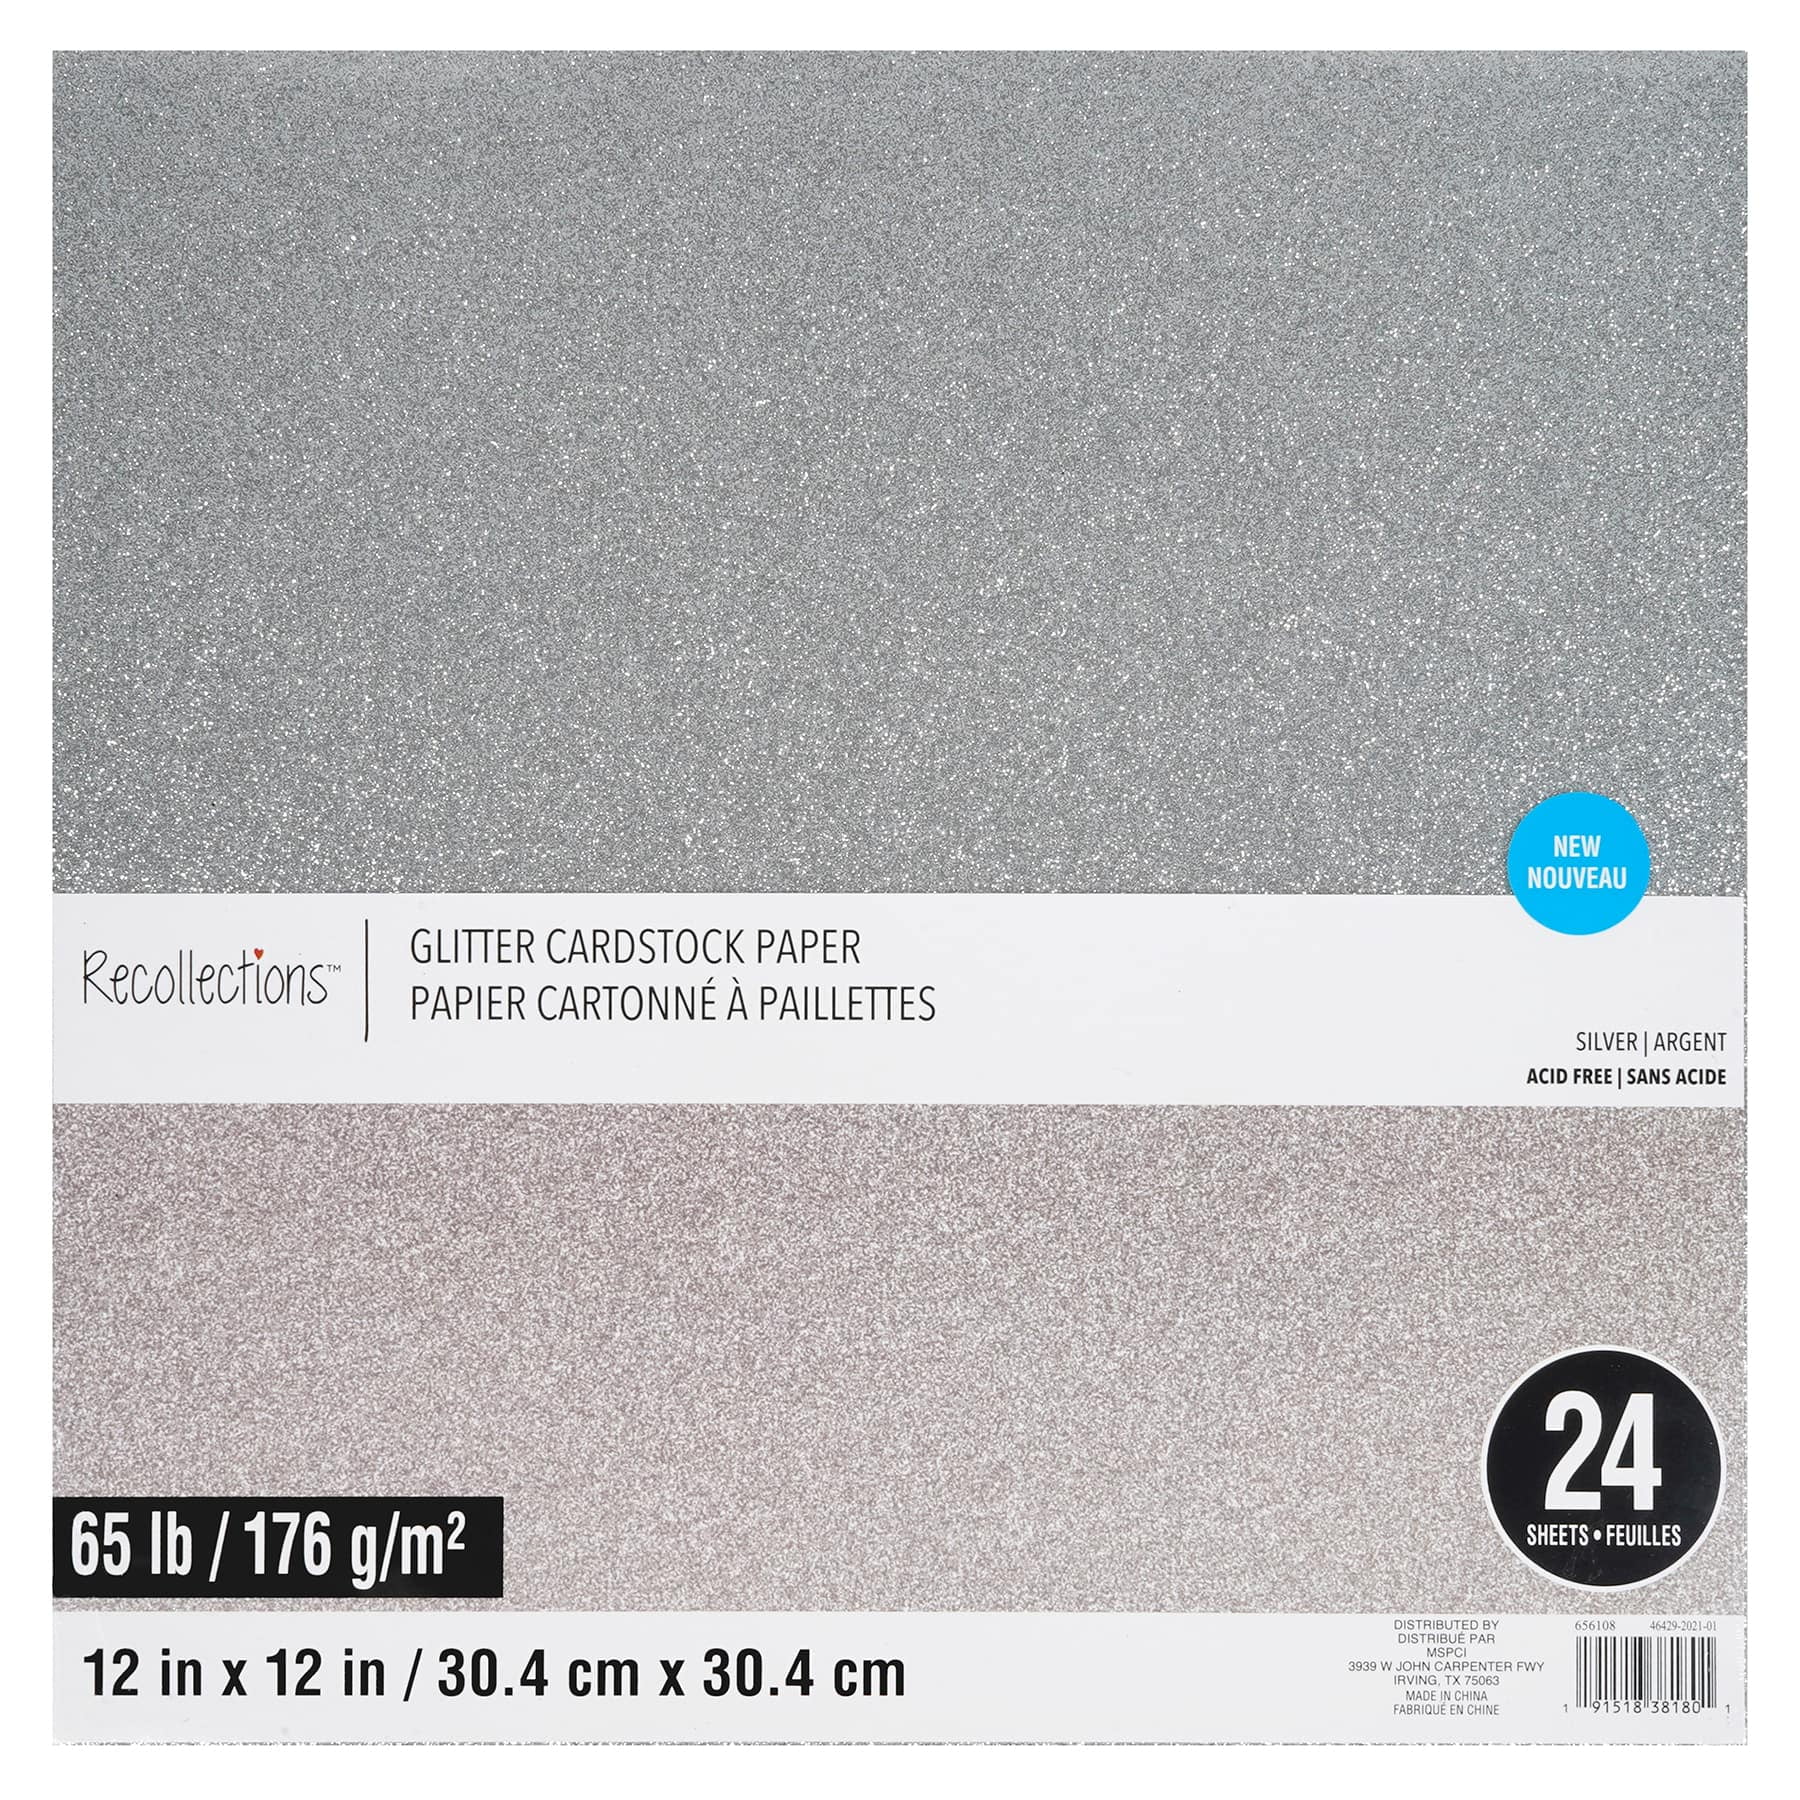 Natural 12 x 12 Linen Texture Cardstock by Recollections™, 60